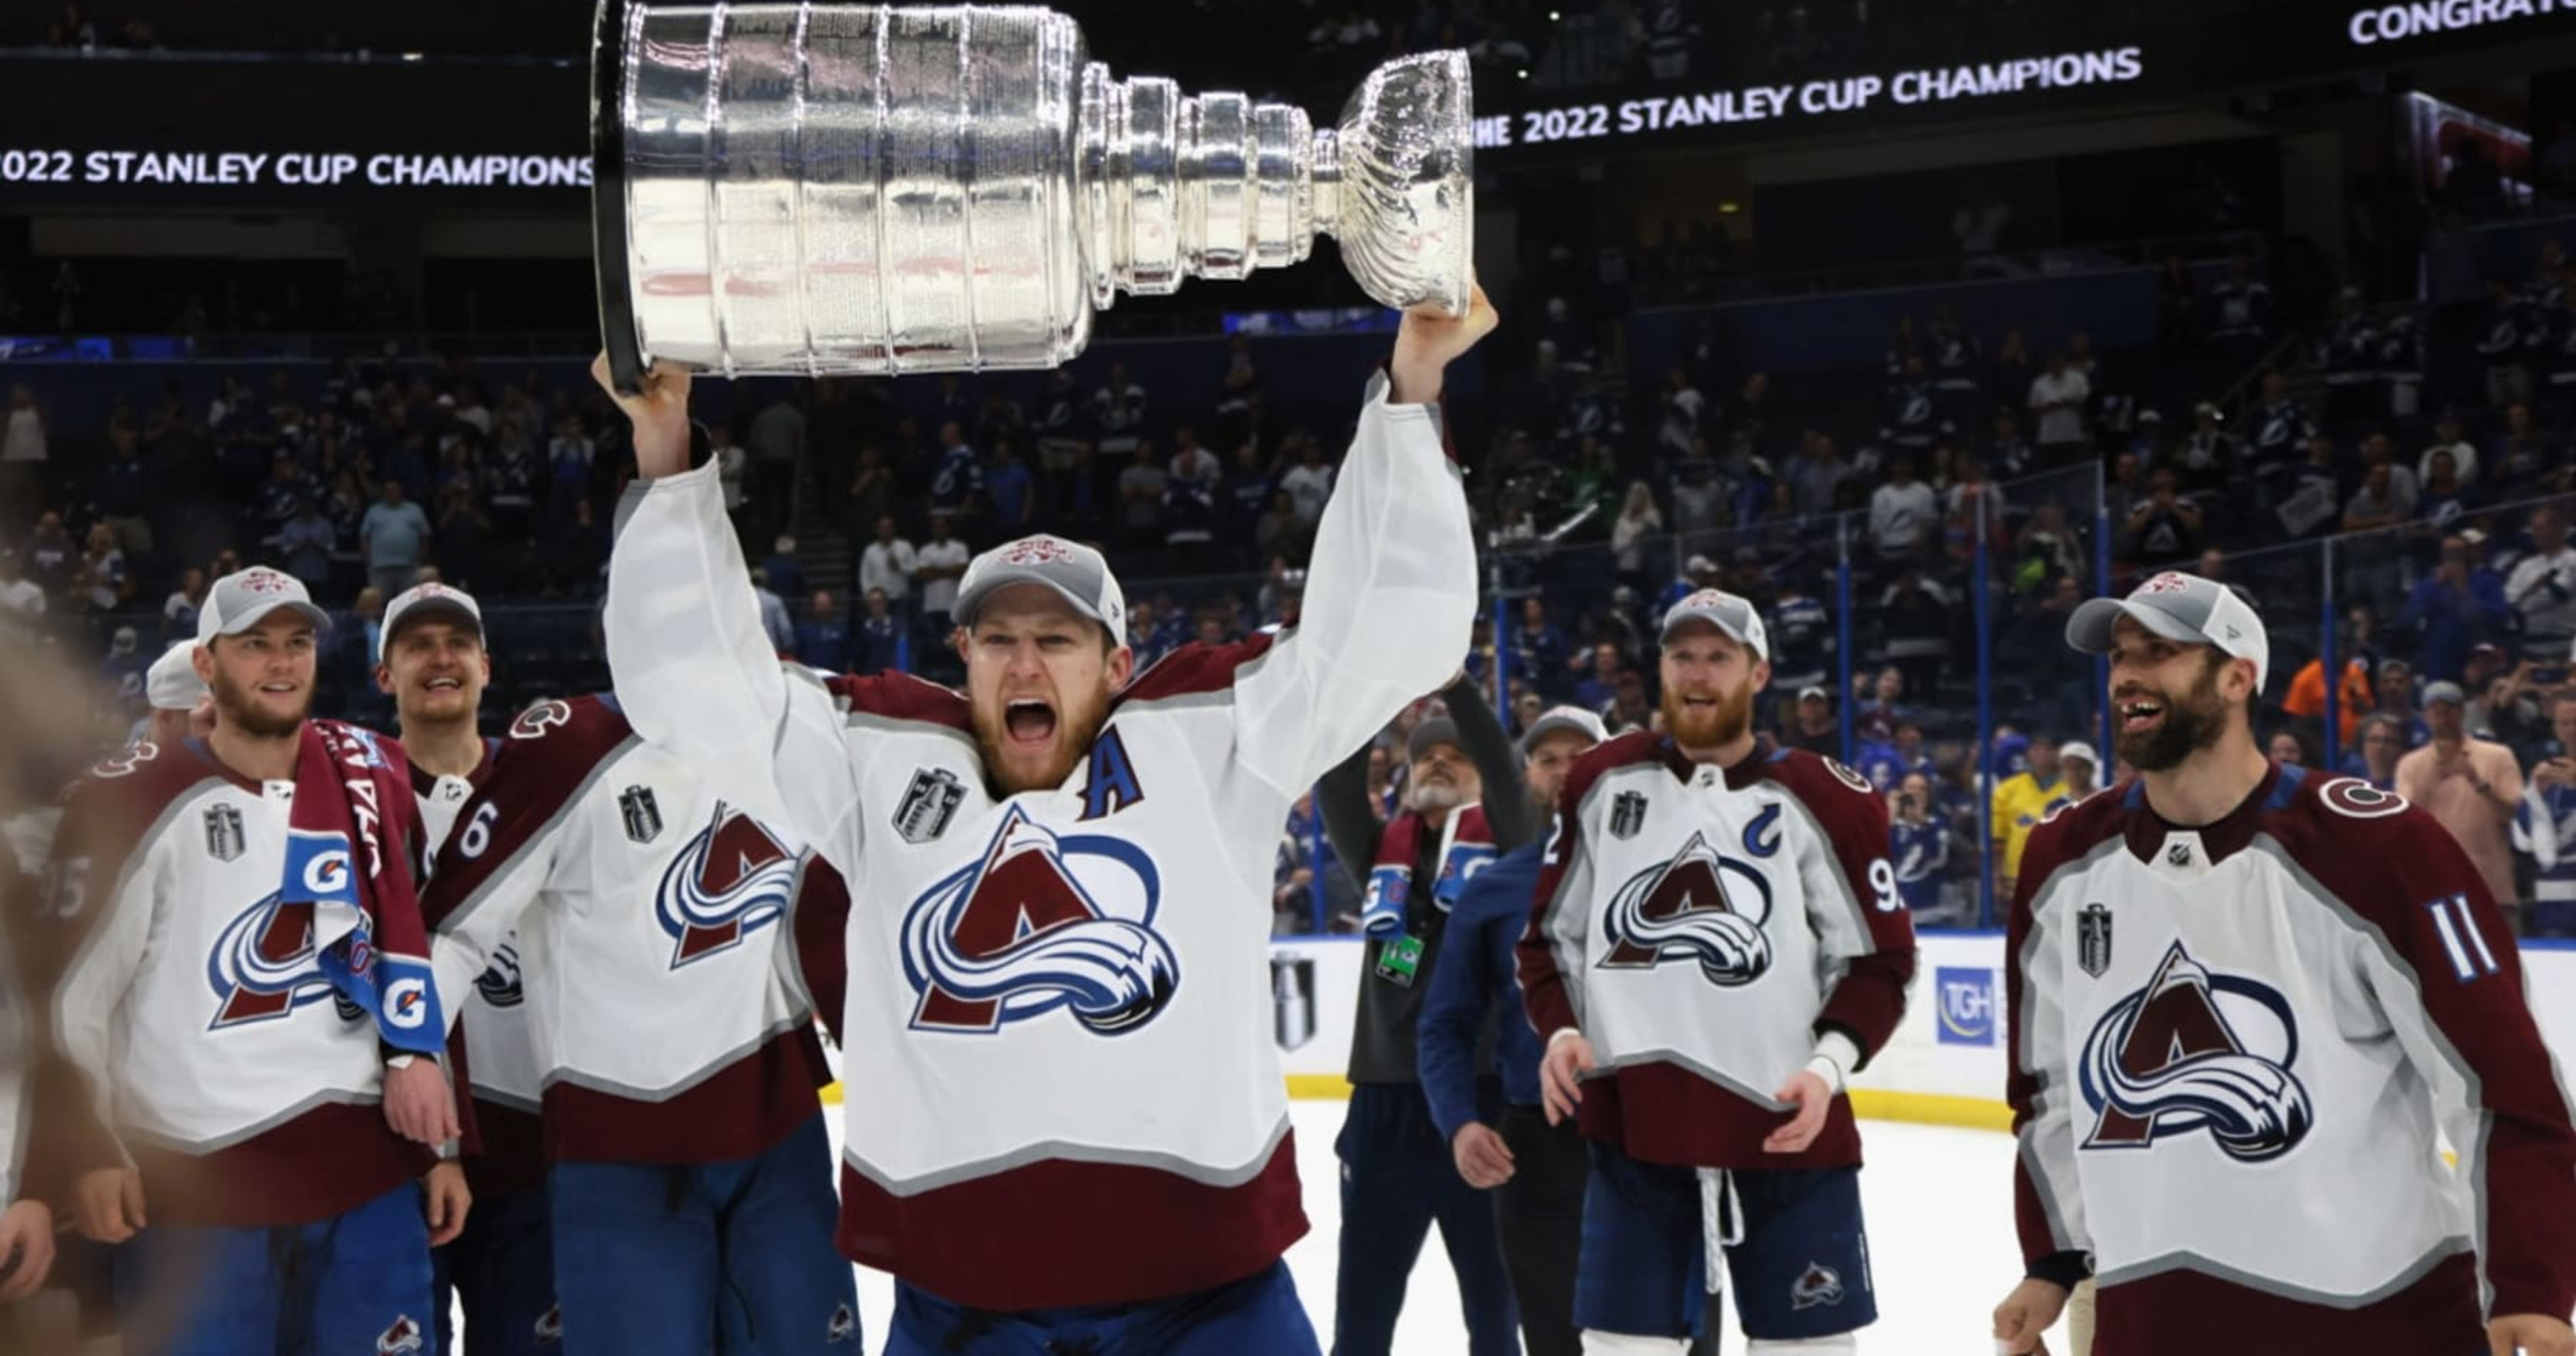 Bold predictions, awards and Stanley Cup picks for the 2022-23 NHL